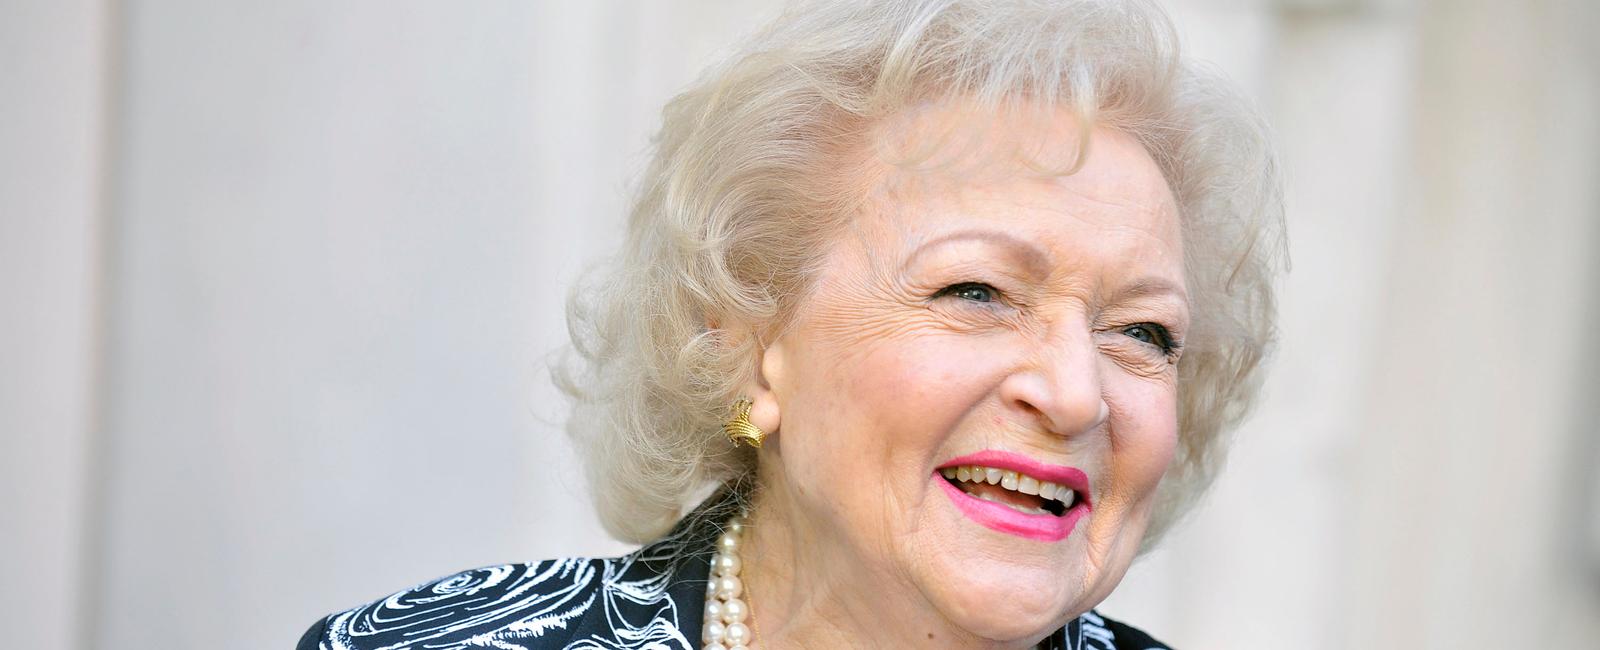 At 88 years old betty white became the oldest person to ever host saturday night live after a facebook group called betty white to host snl please gathered almost 1million fans